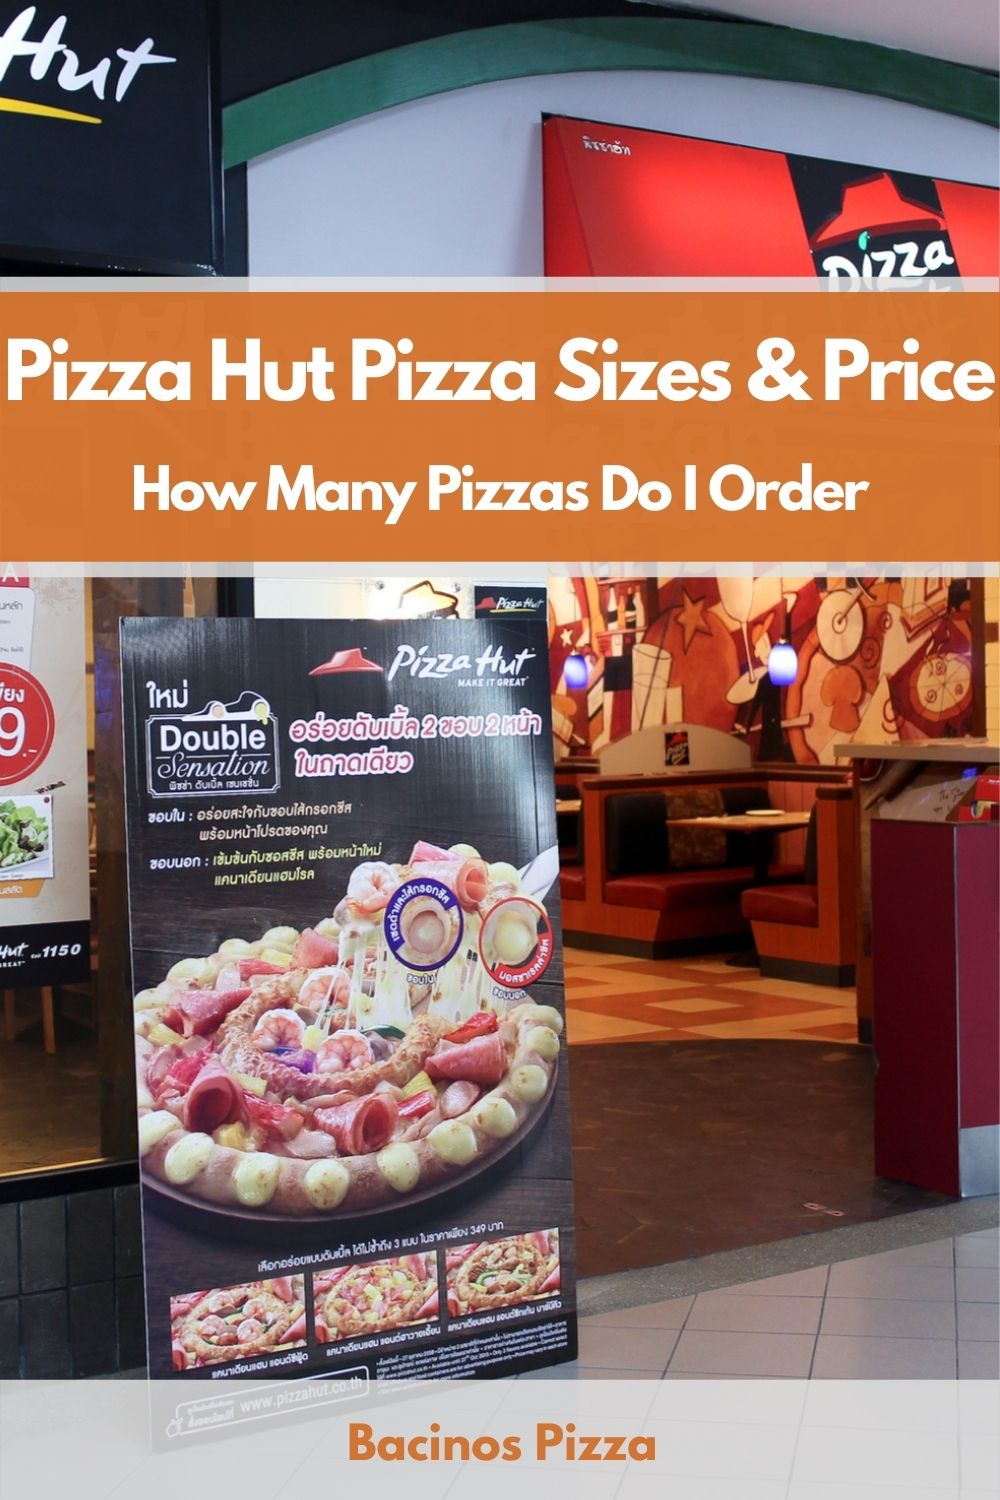 Pizza Hut Pizza Sizes & Price How Many Pizzas Do I Order pin